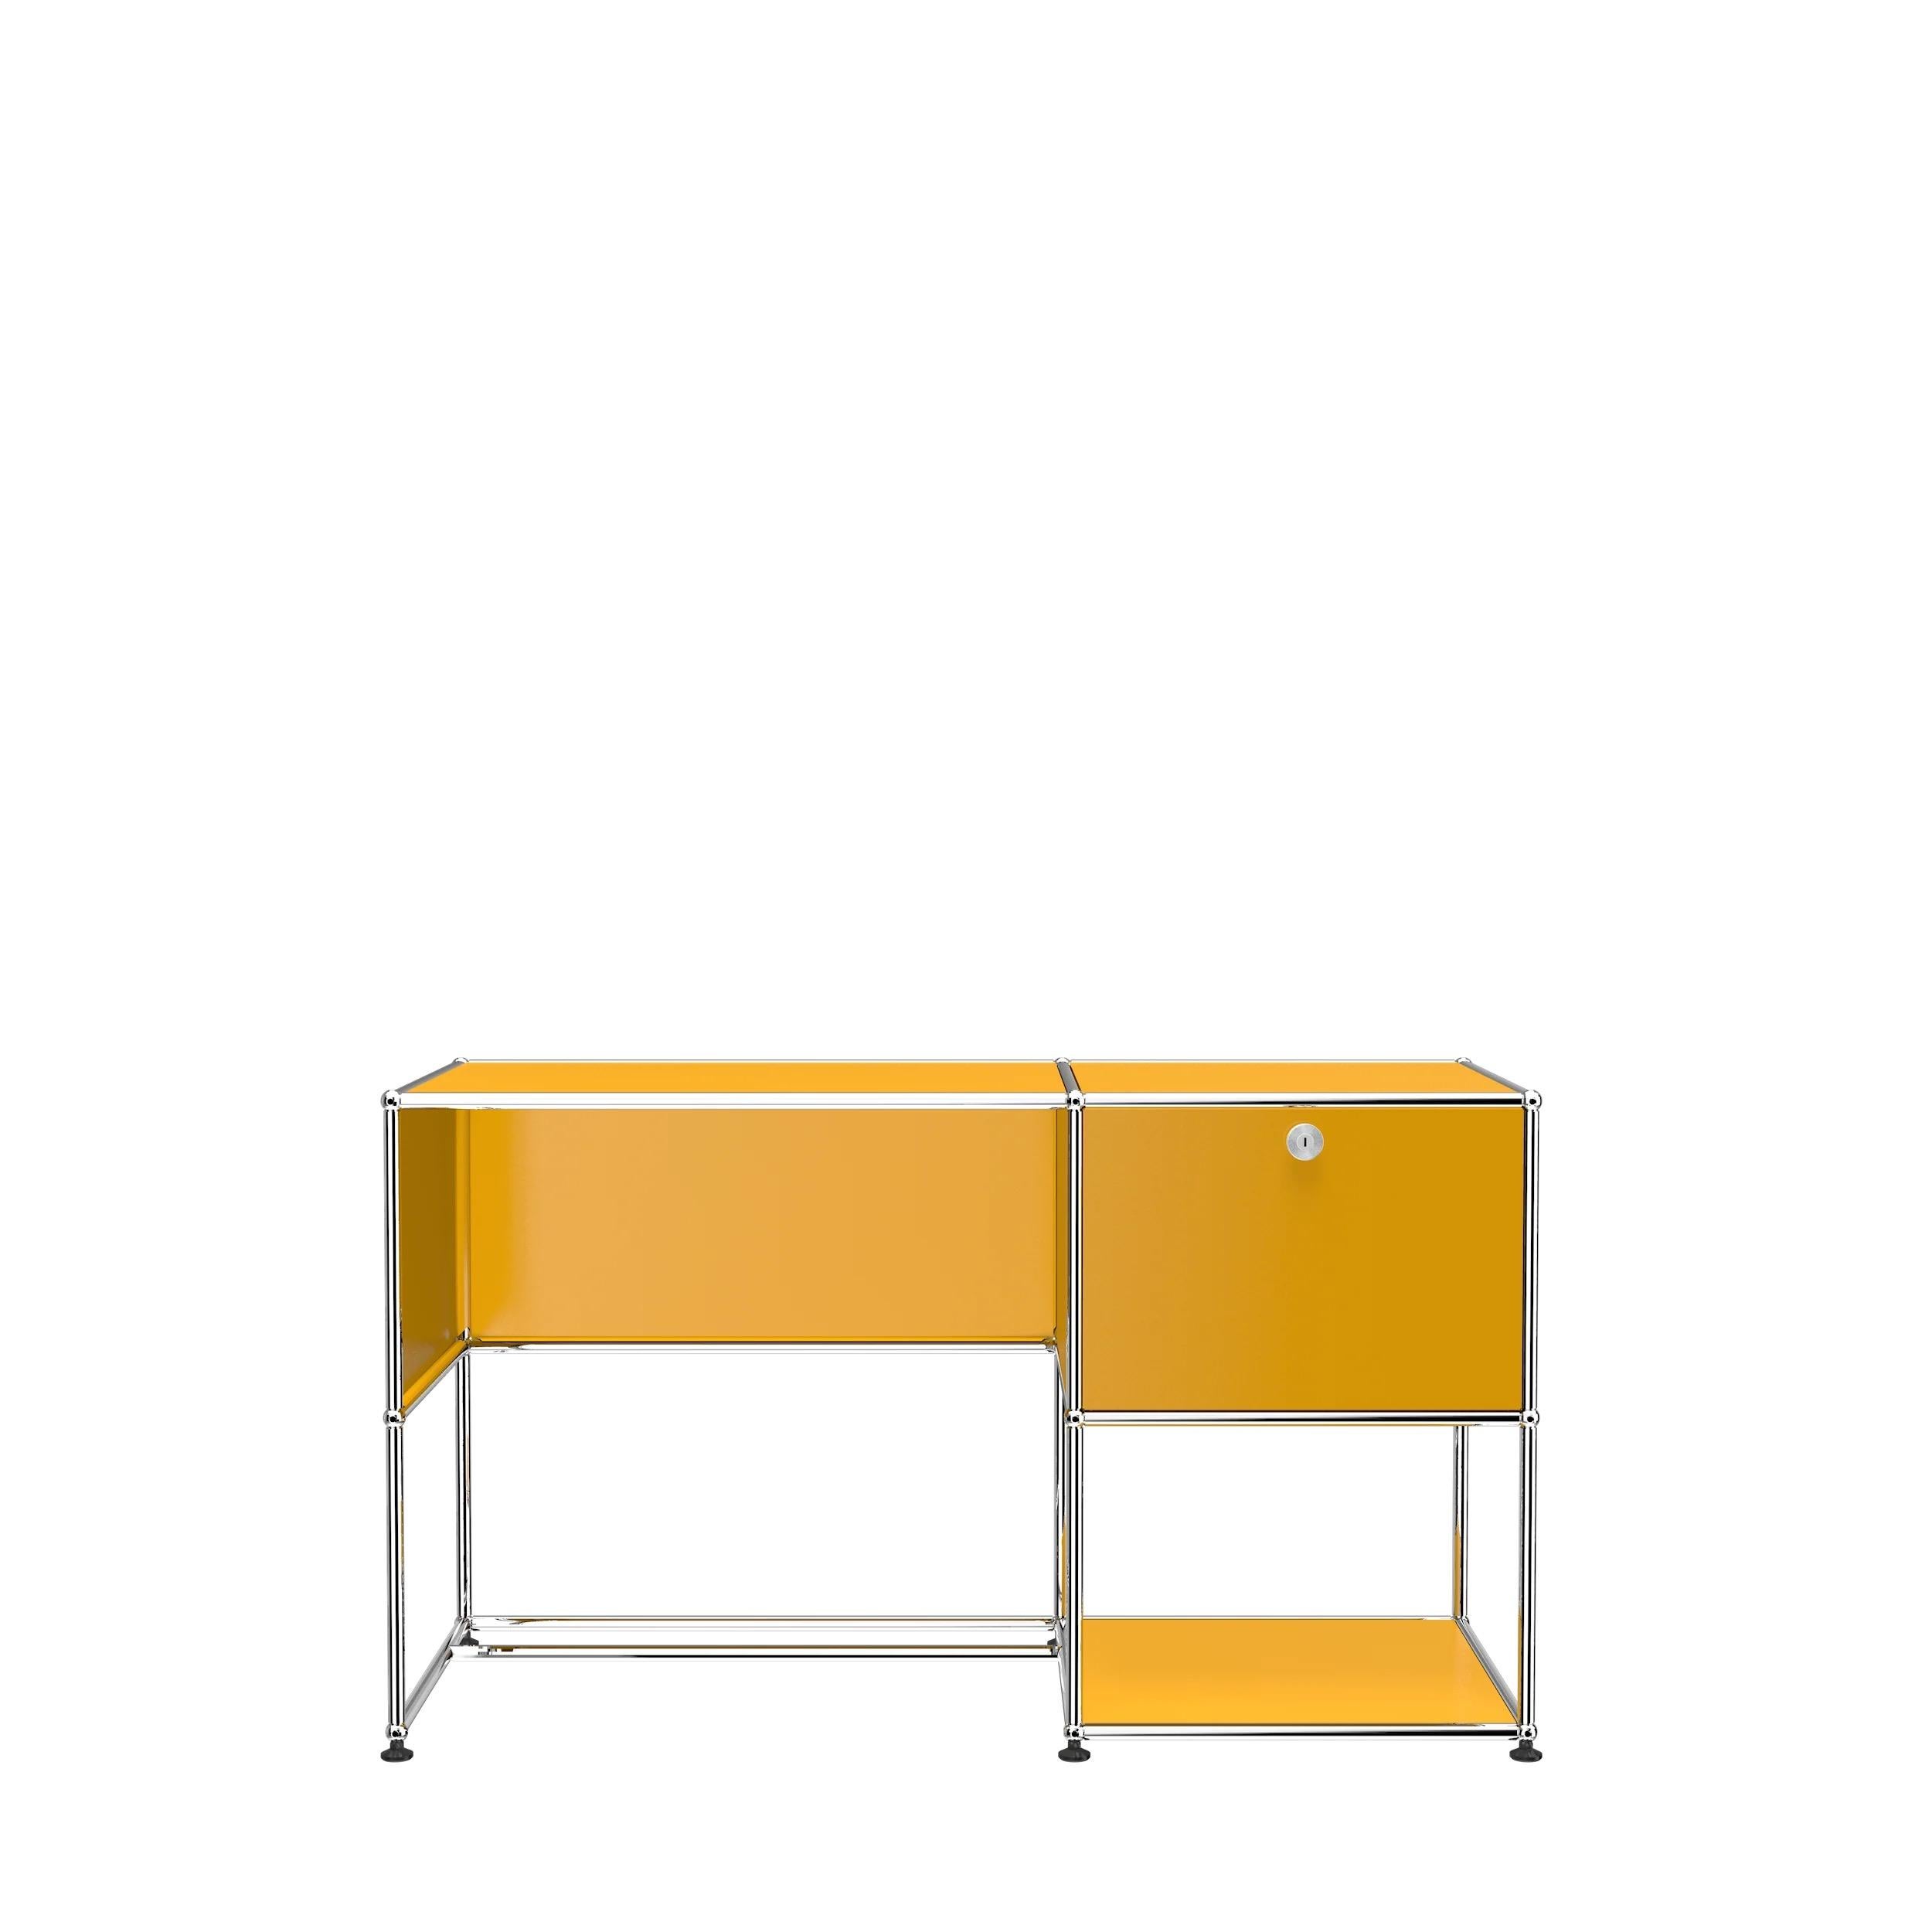 USM Haller Custom Desk Unit 'A' Designed by Fritz Haller and Paul Schaerer In New Condition For Sale In New York, NY